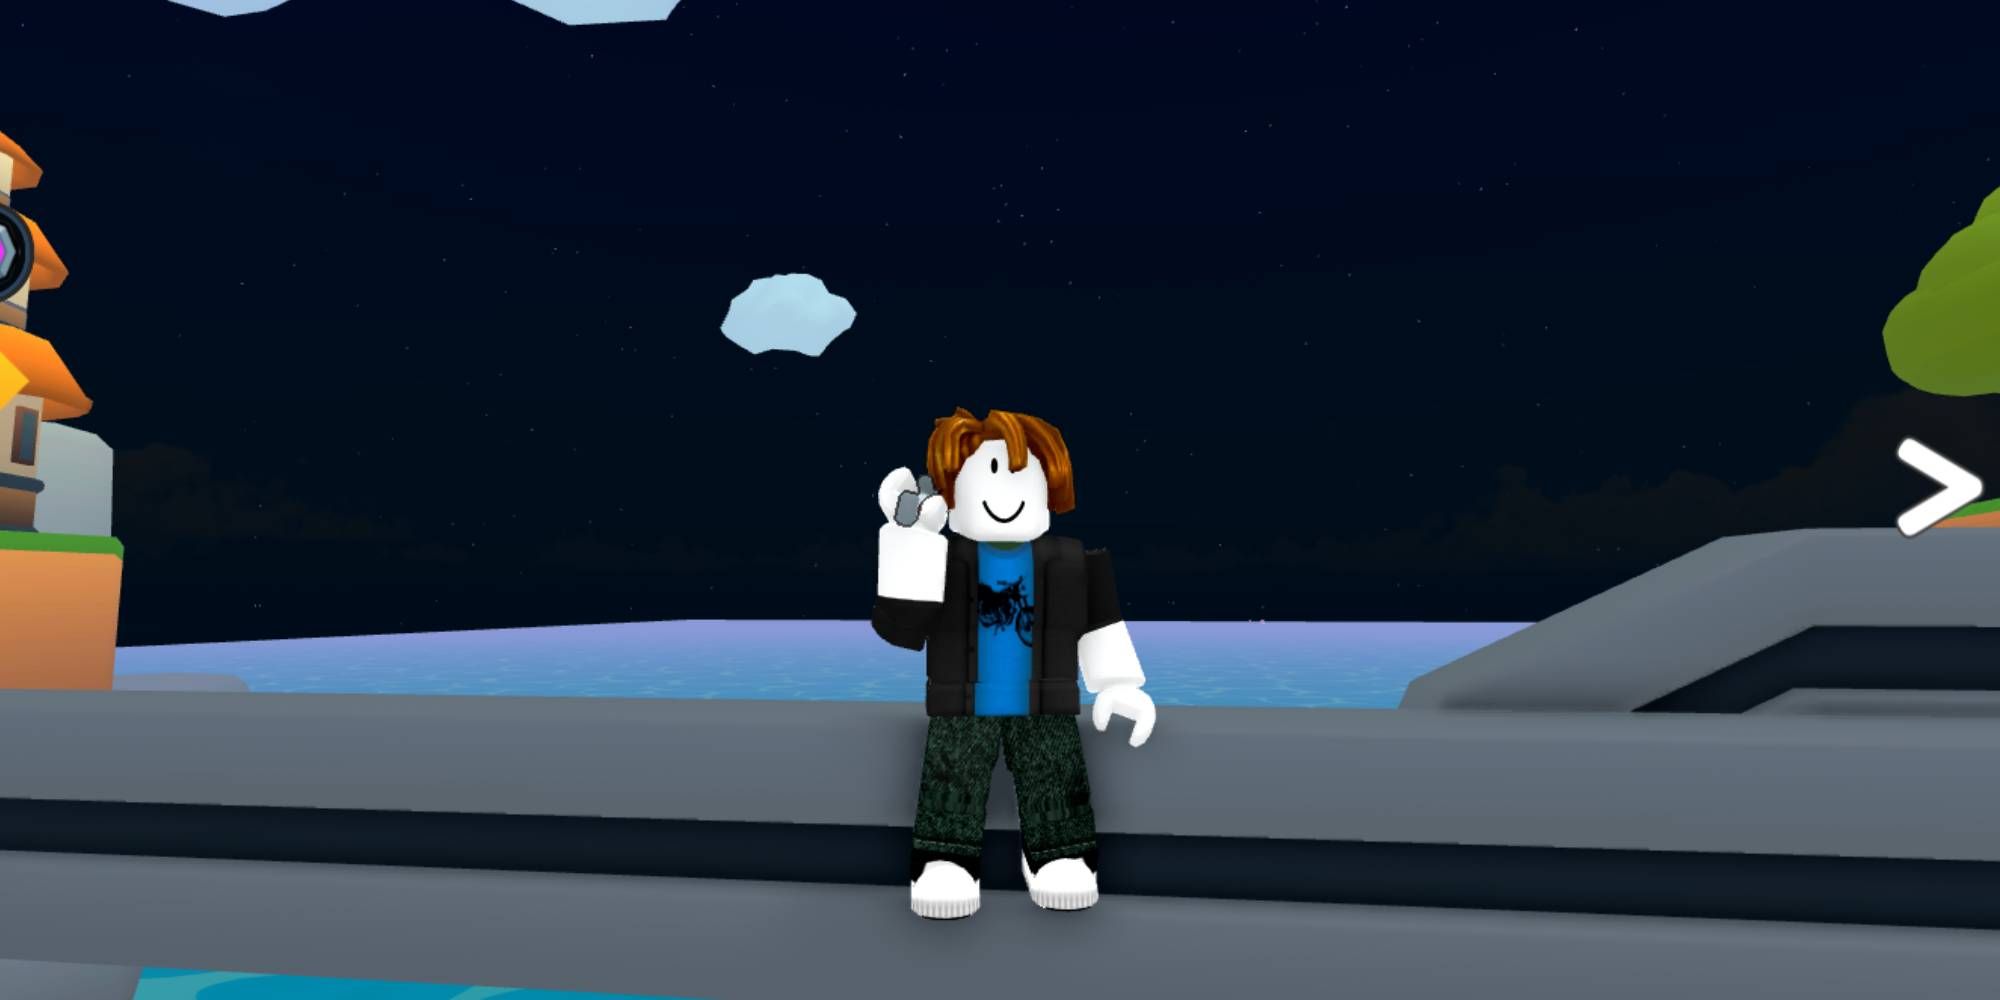 Roblox Sword Fighters Simulator codes (May 2023): Free Boosts and